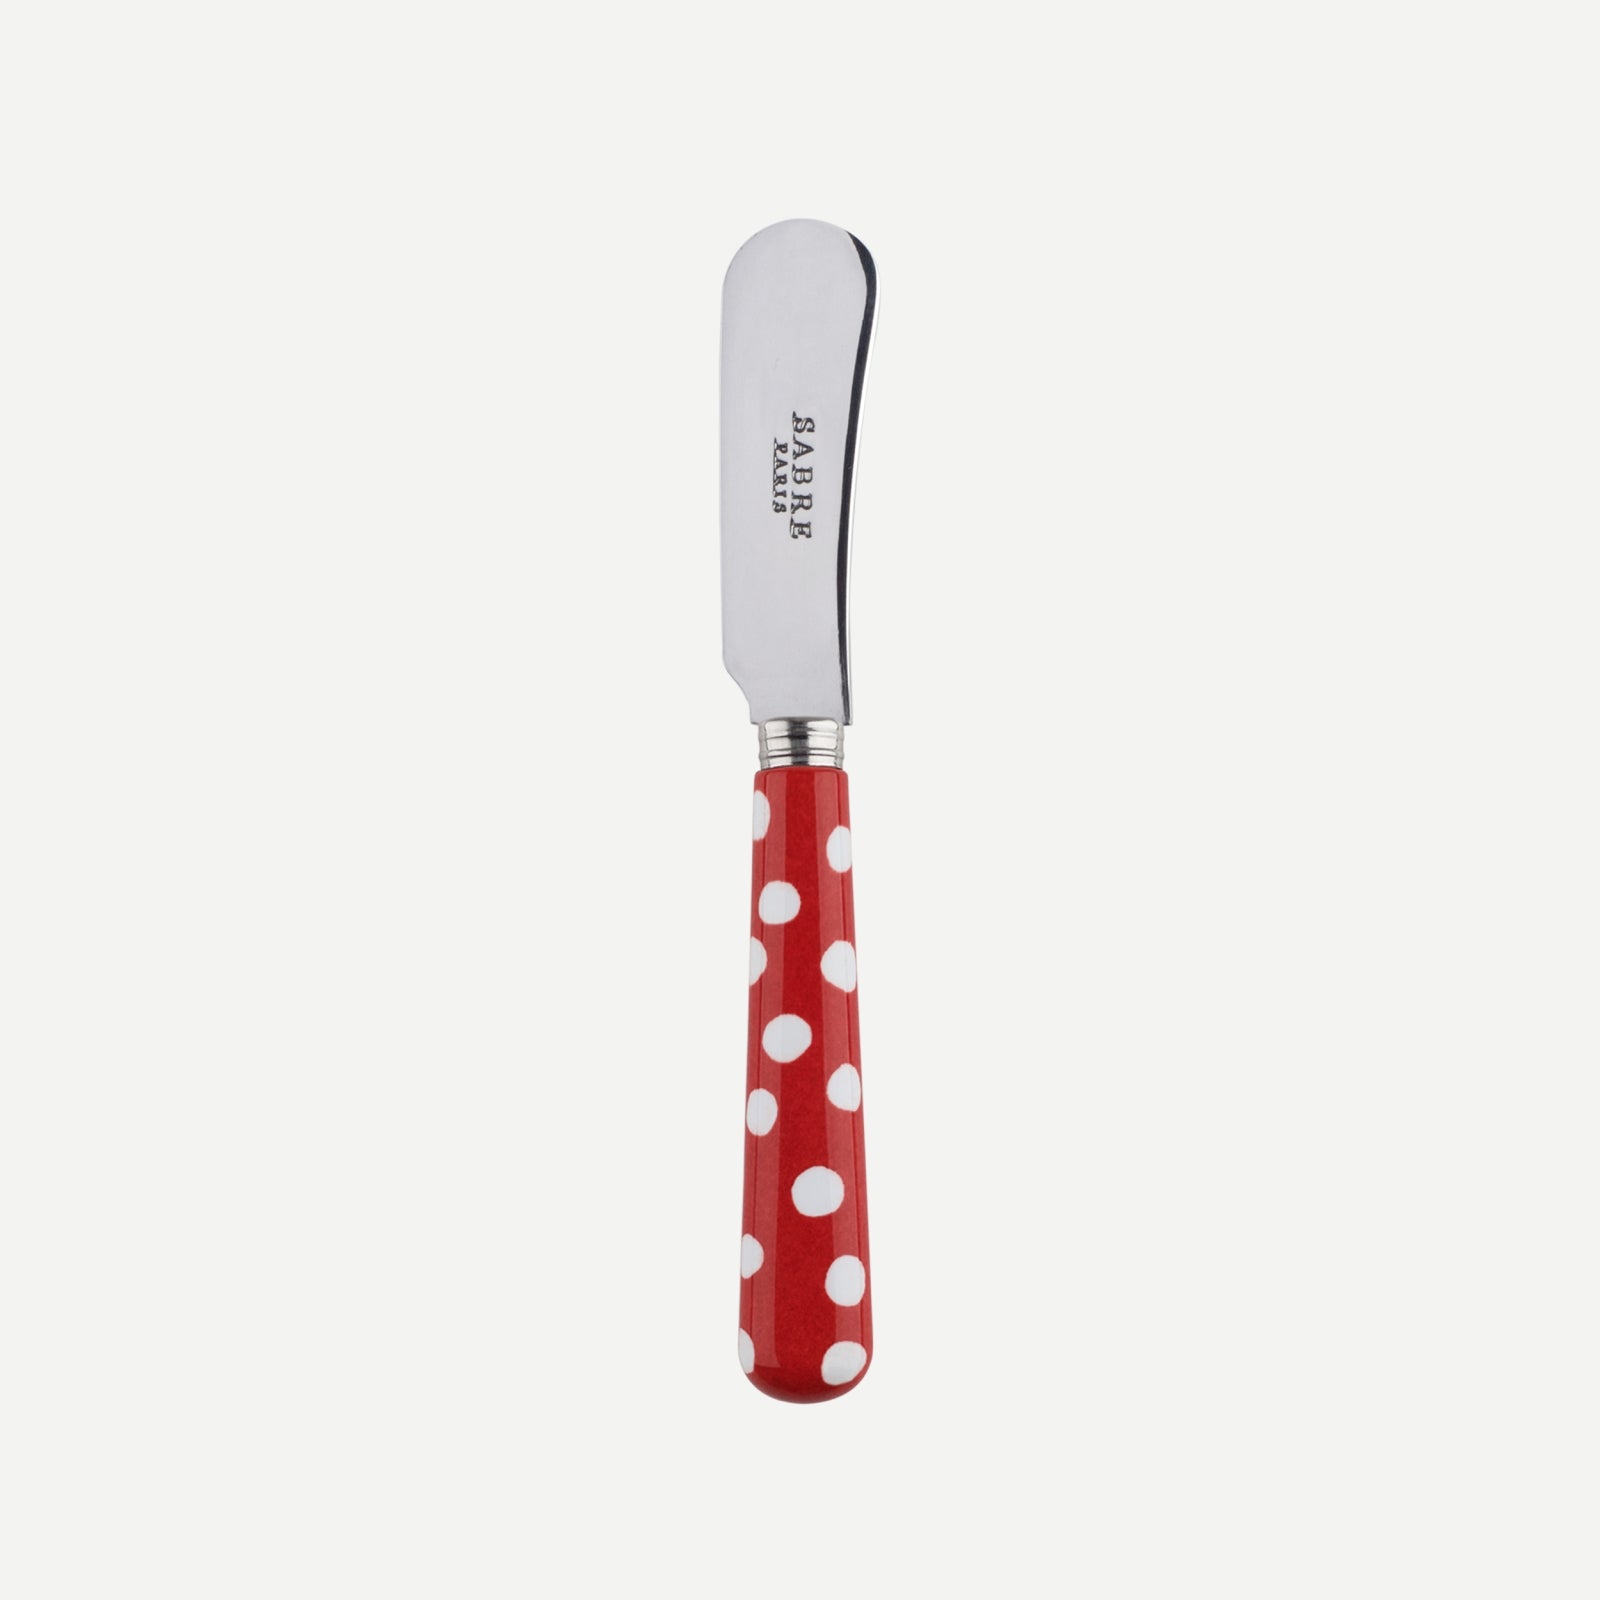 Butter spreader - White Dots. - Red